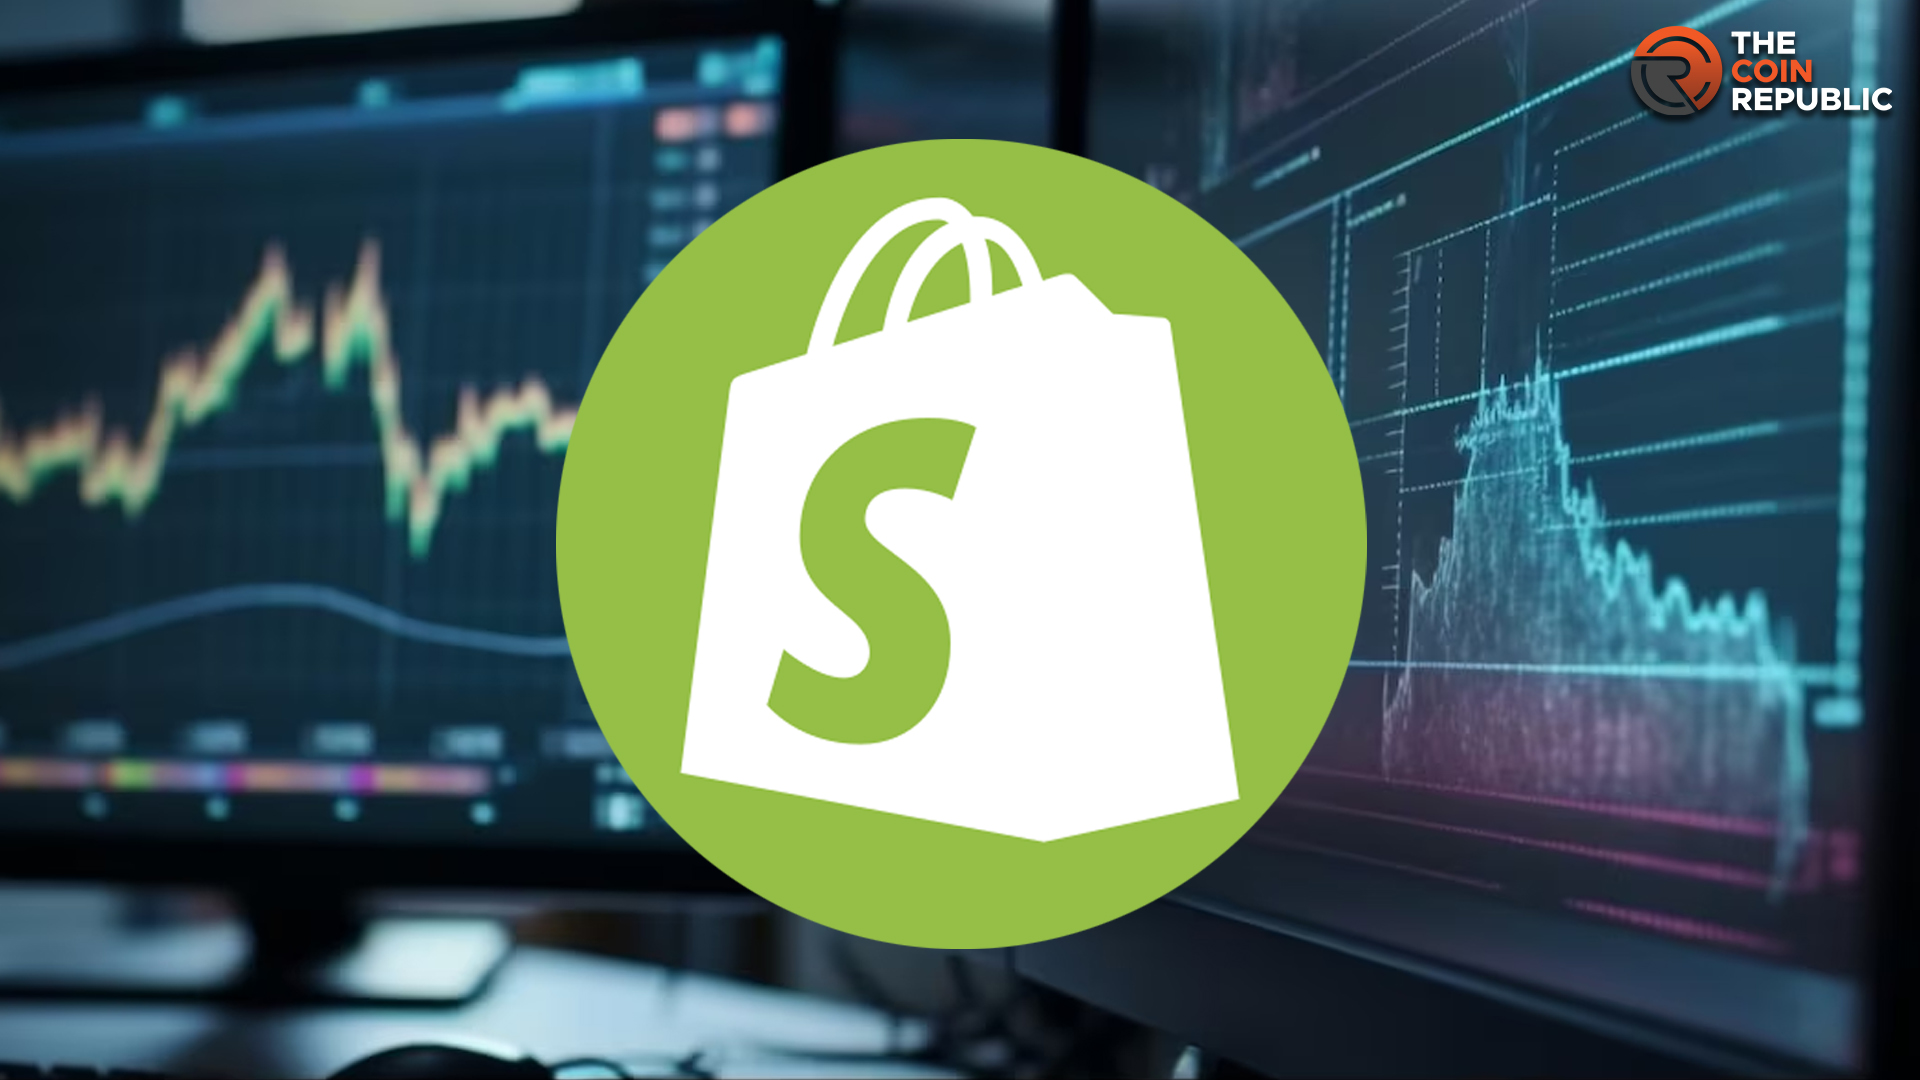 SHOP Stock: Will Shopify Inc. Take a U-turn After Deal With AMZN?